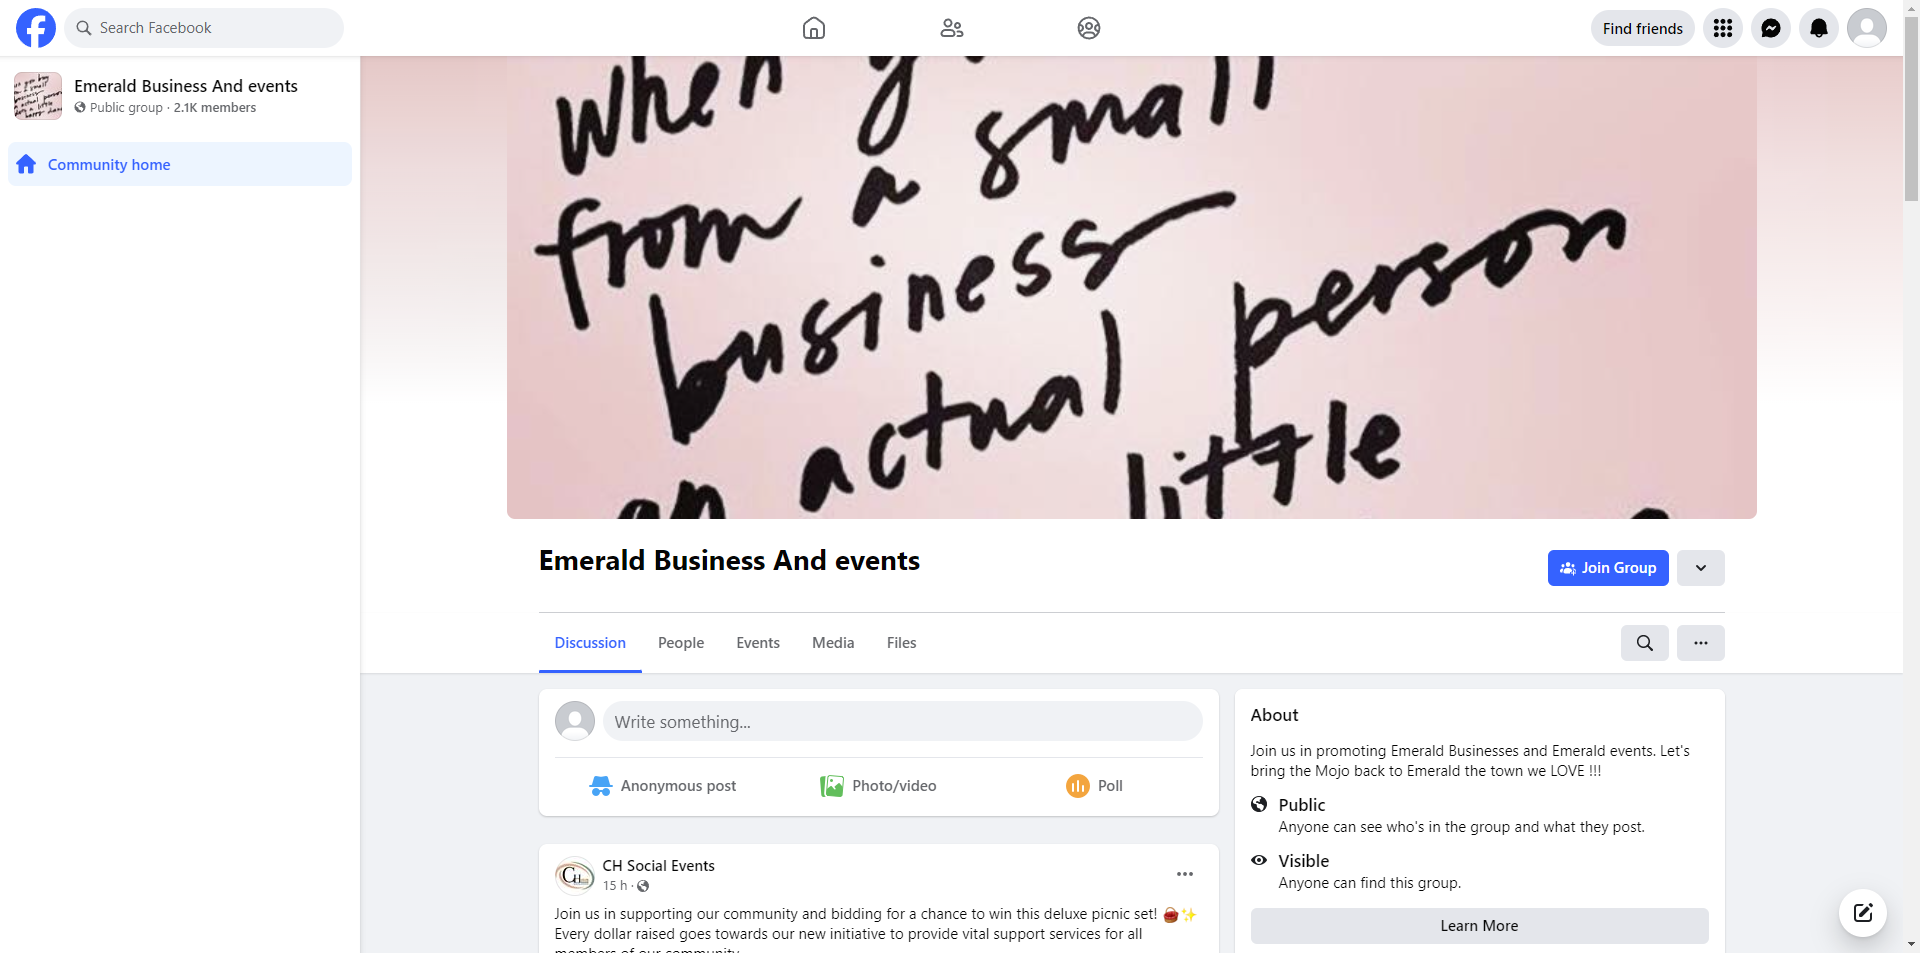 Emerald Business and Events